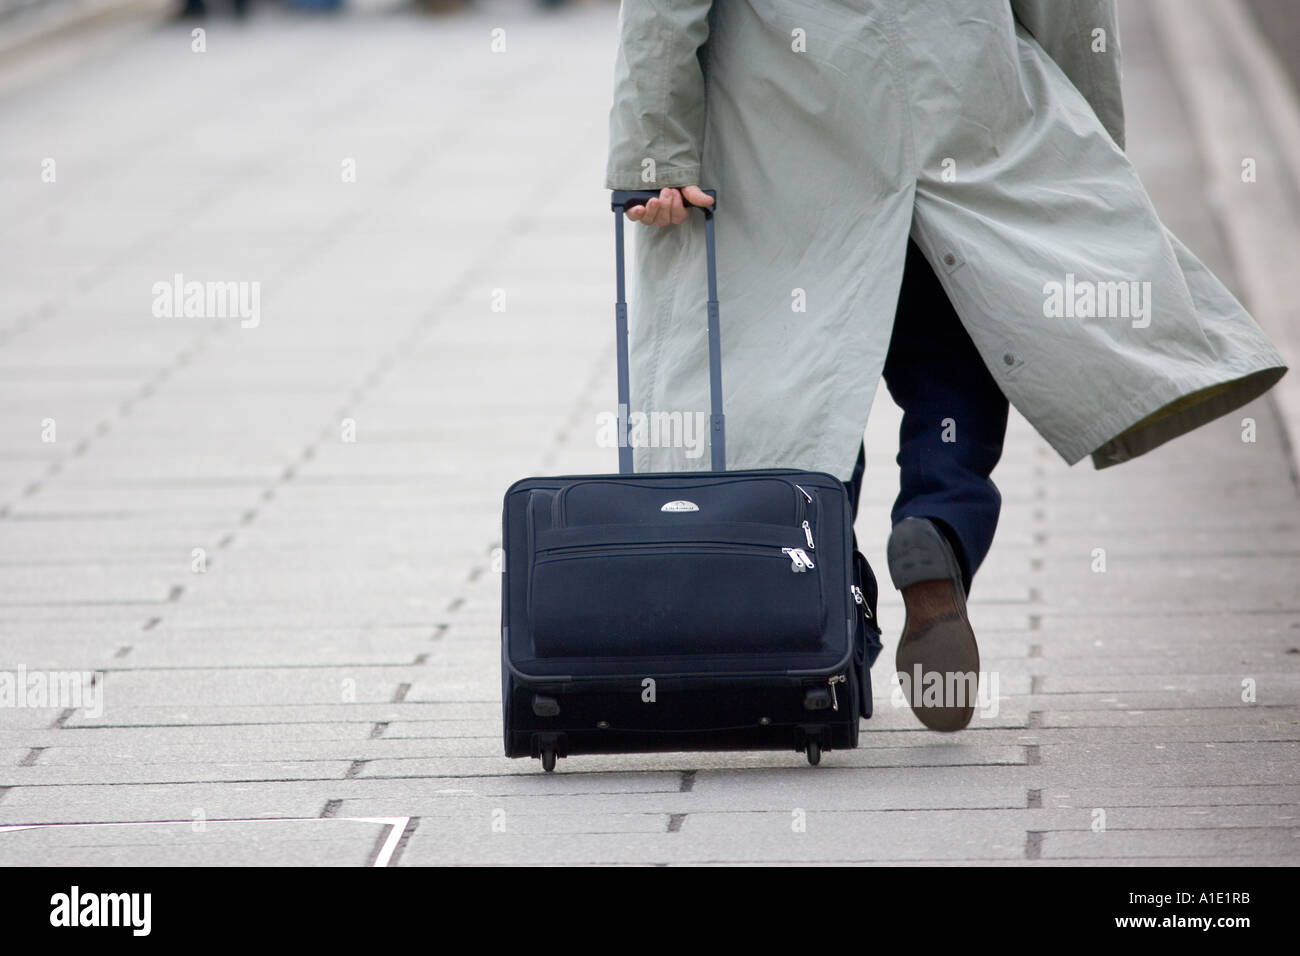 Commuter walking fast and pulling a suitcase London England United Kingdom  Stock Photo - Alamy